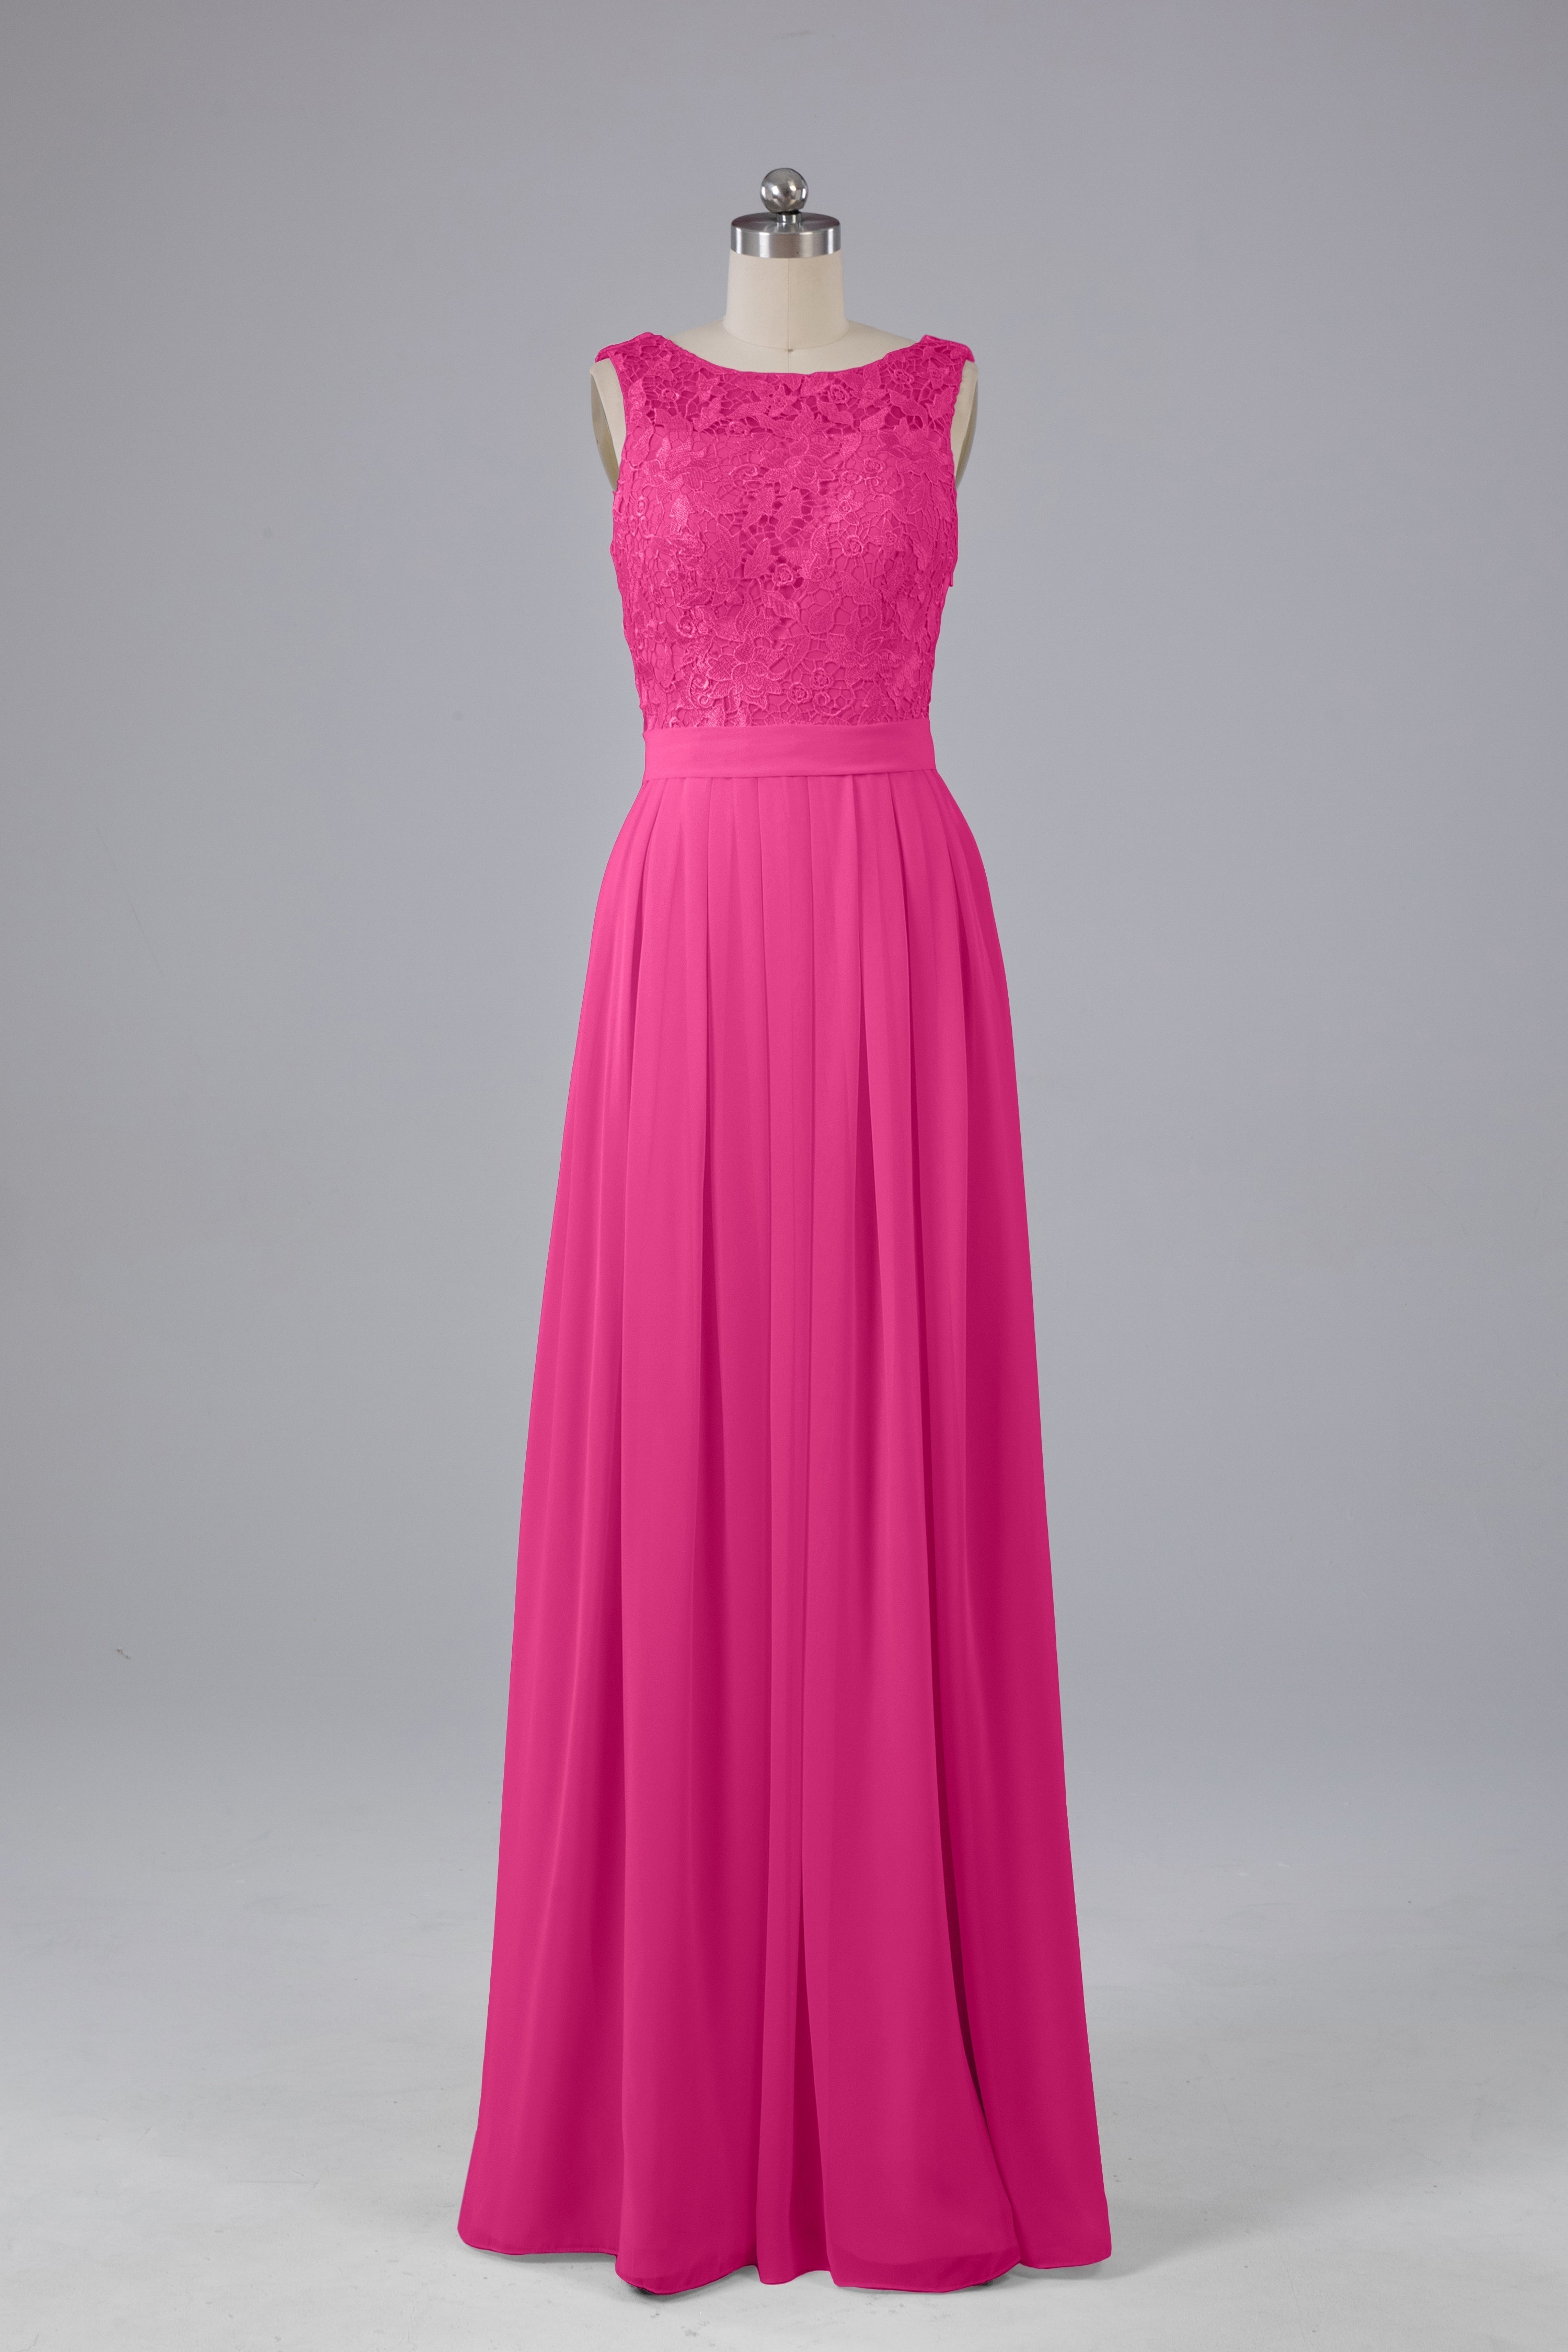 Homecoming Dresses Classy, A-line Lace Top Floor Length Chiffon Bridesmaid Dresses